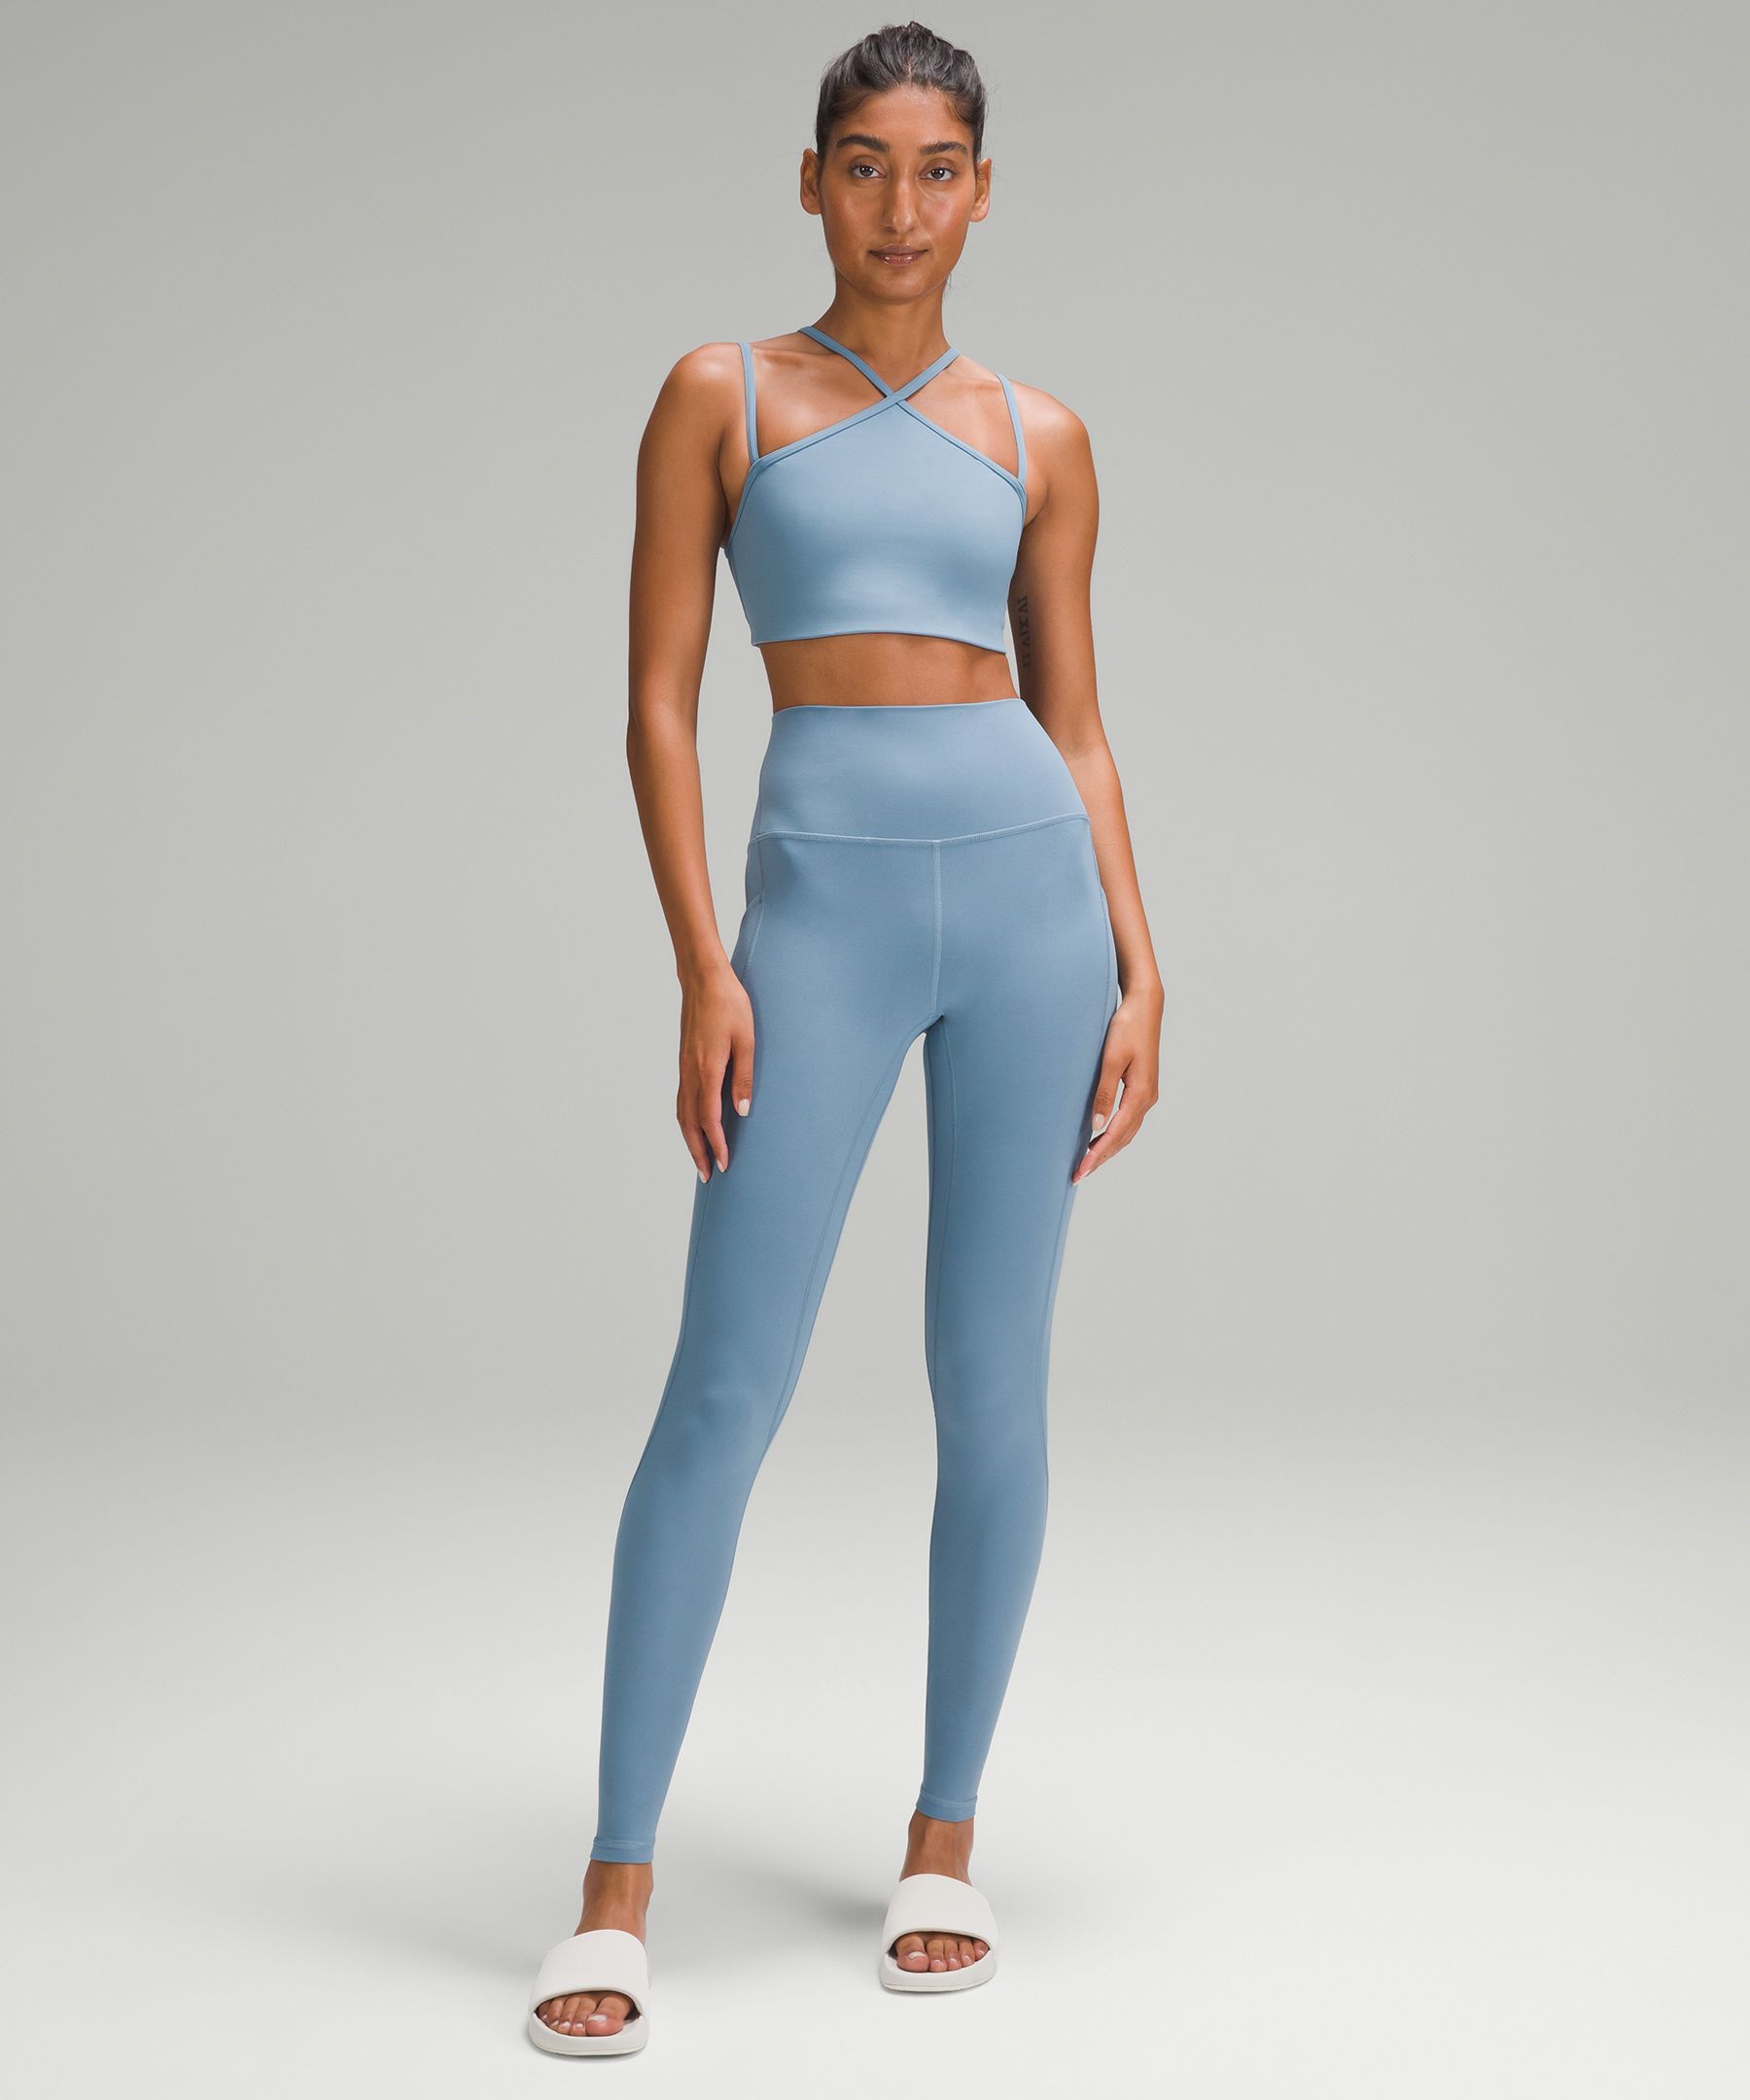 Lululemon - Align™ High-Rise Pant with Pockets 28 *Online Only